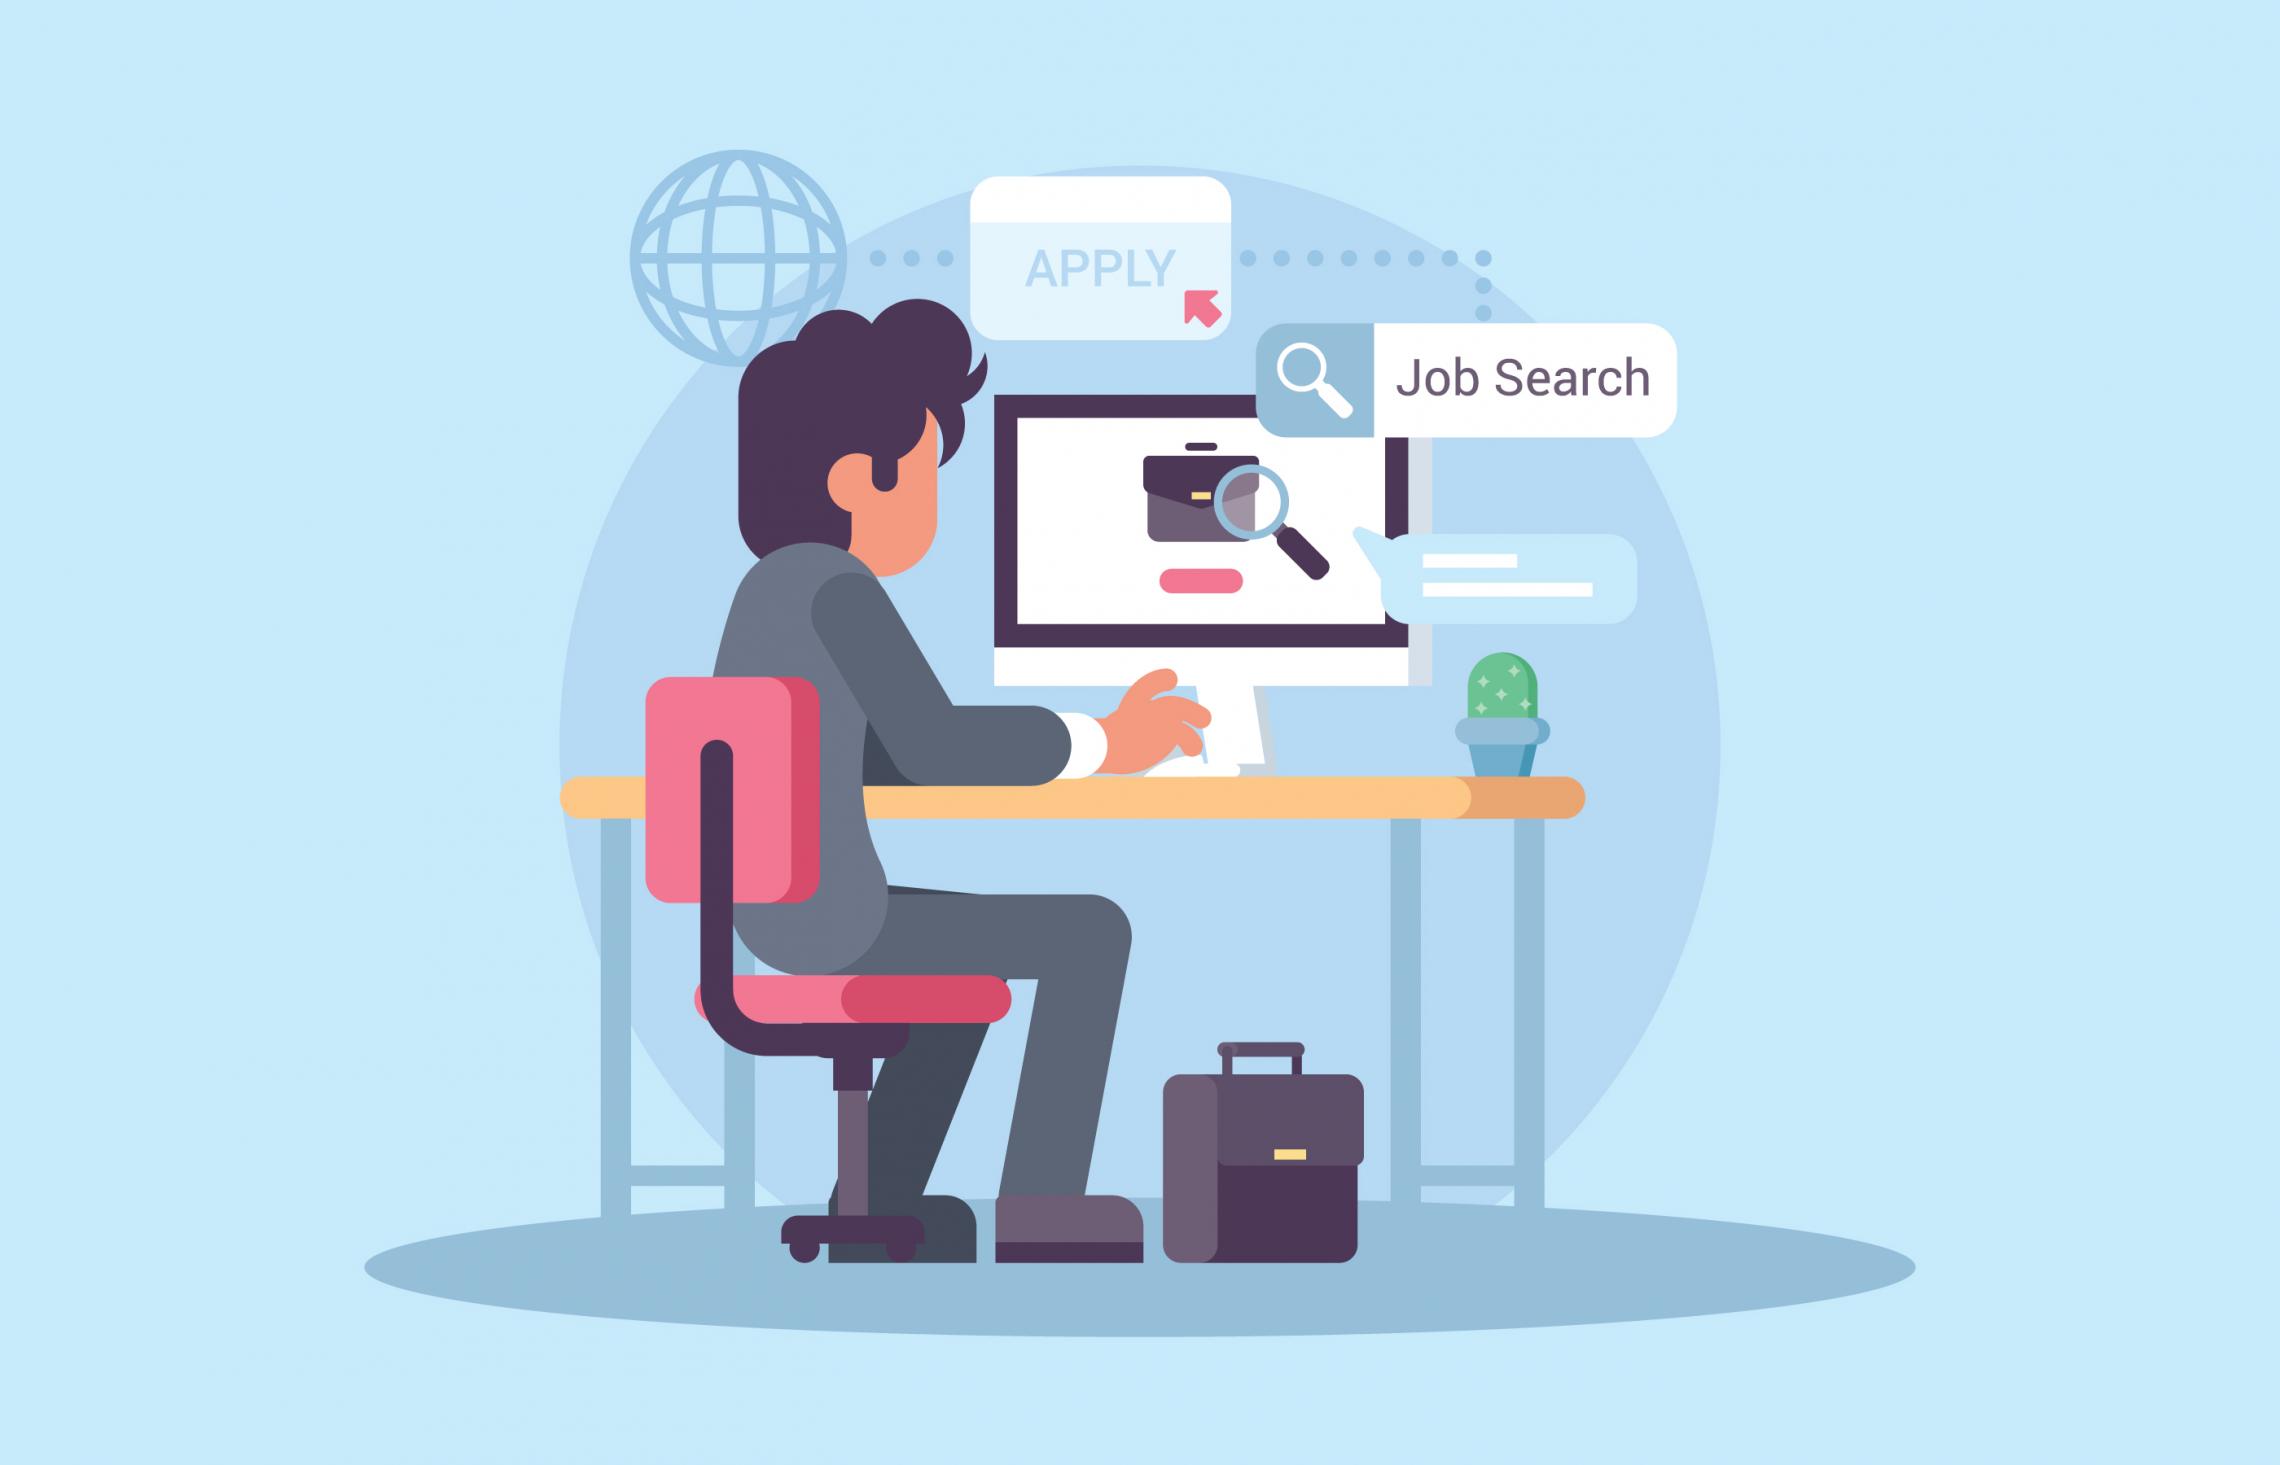 Young Man Searching For Jobs 169250 - Download Free Vectors, Clipart Graphics & Vector Art